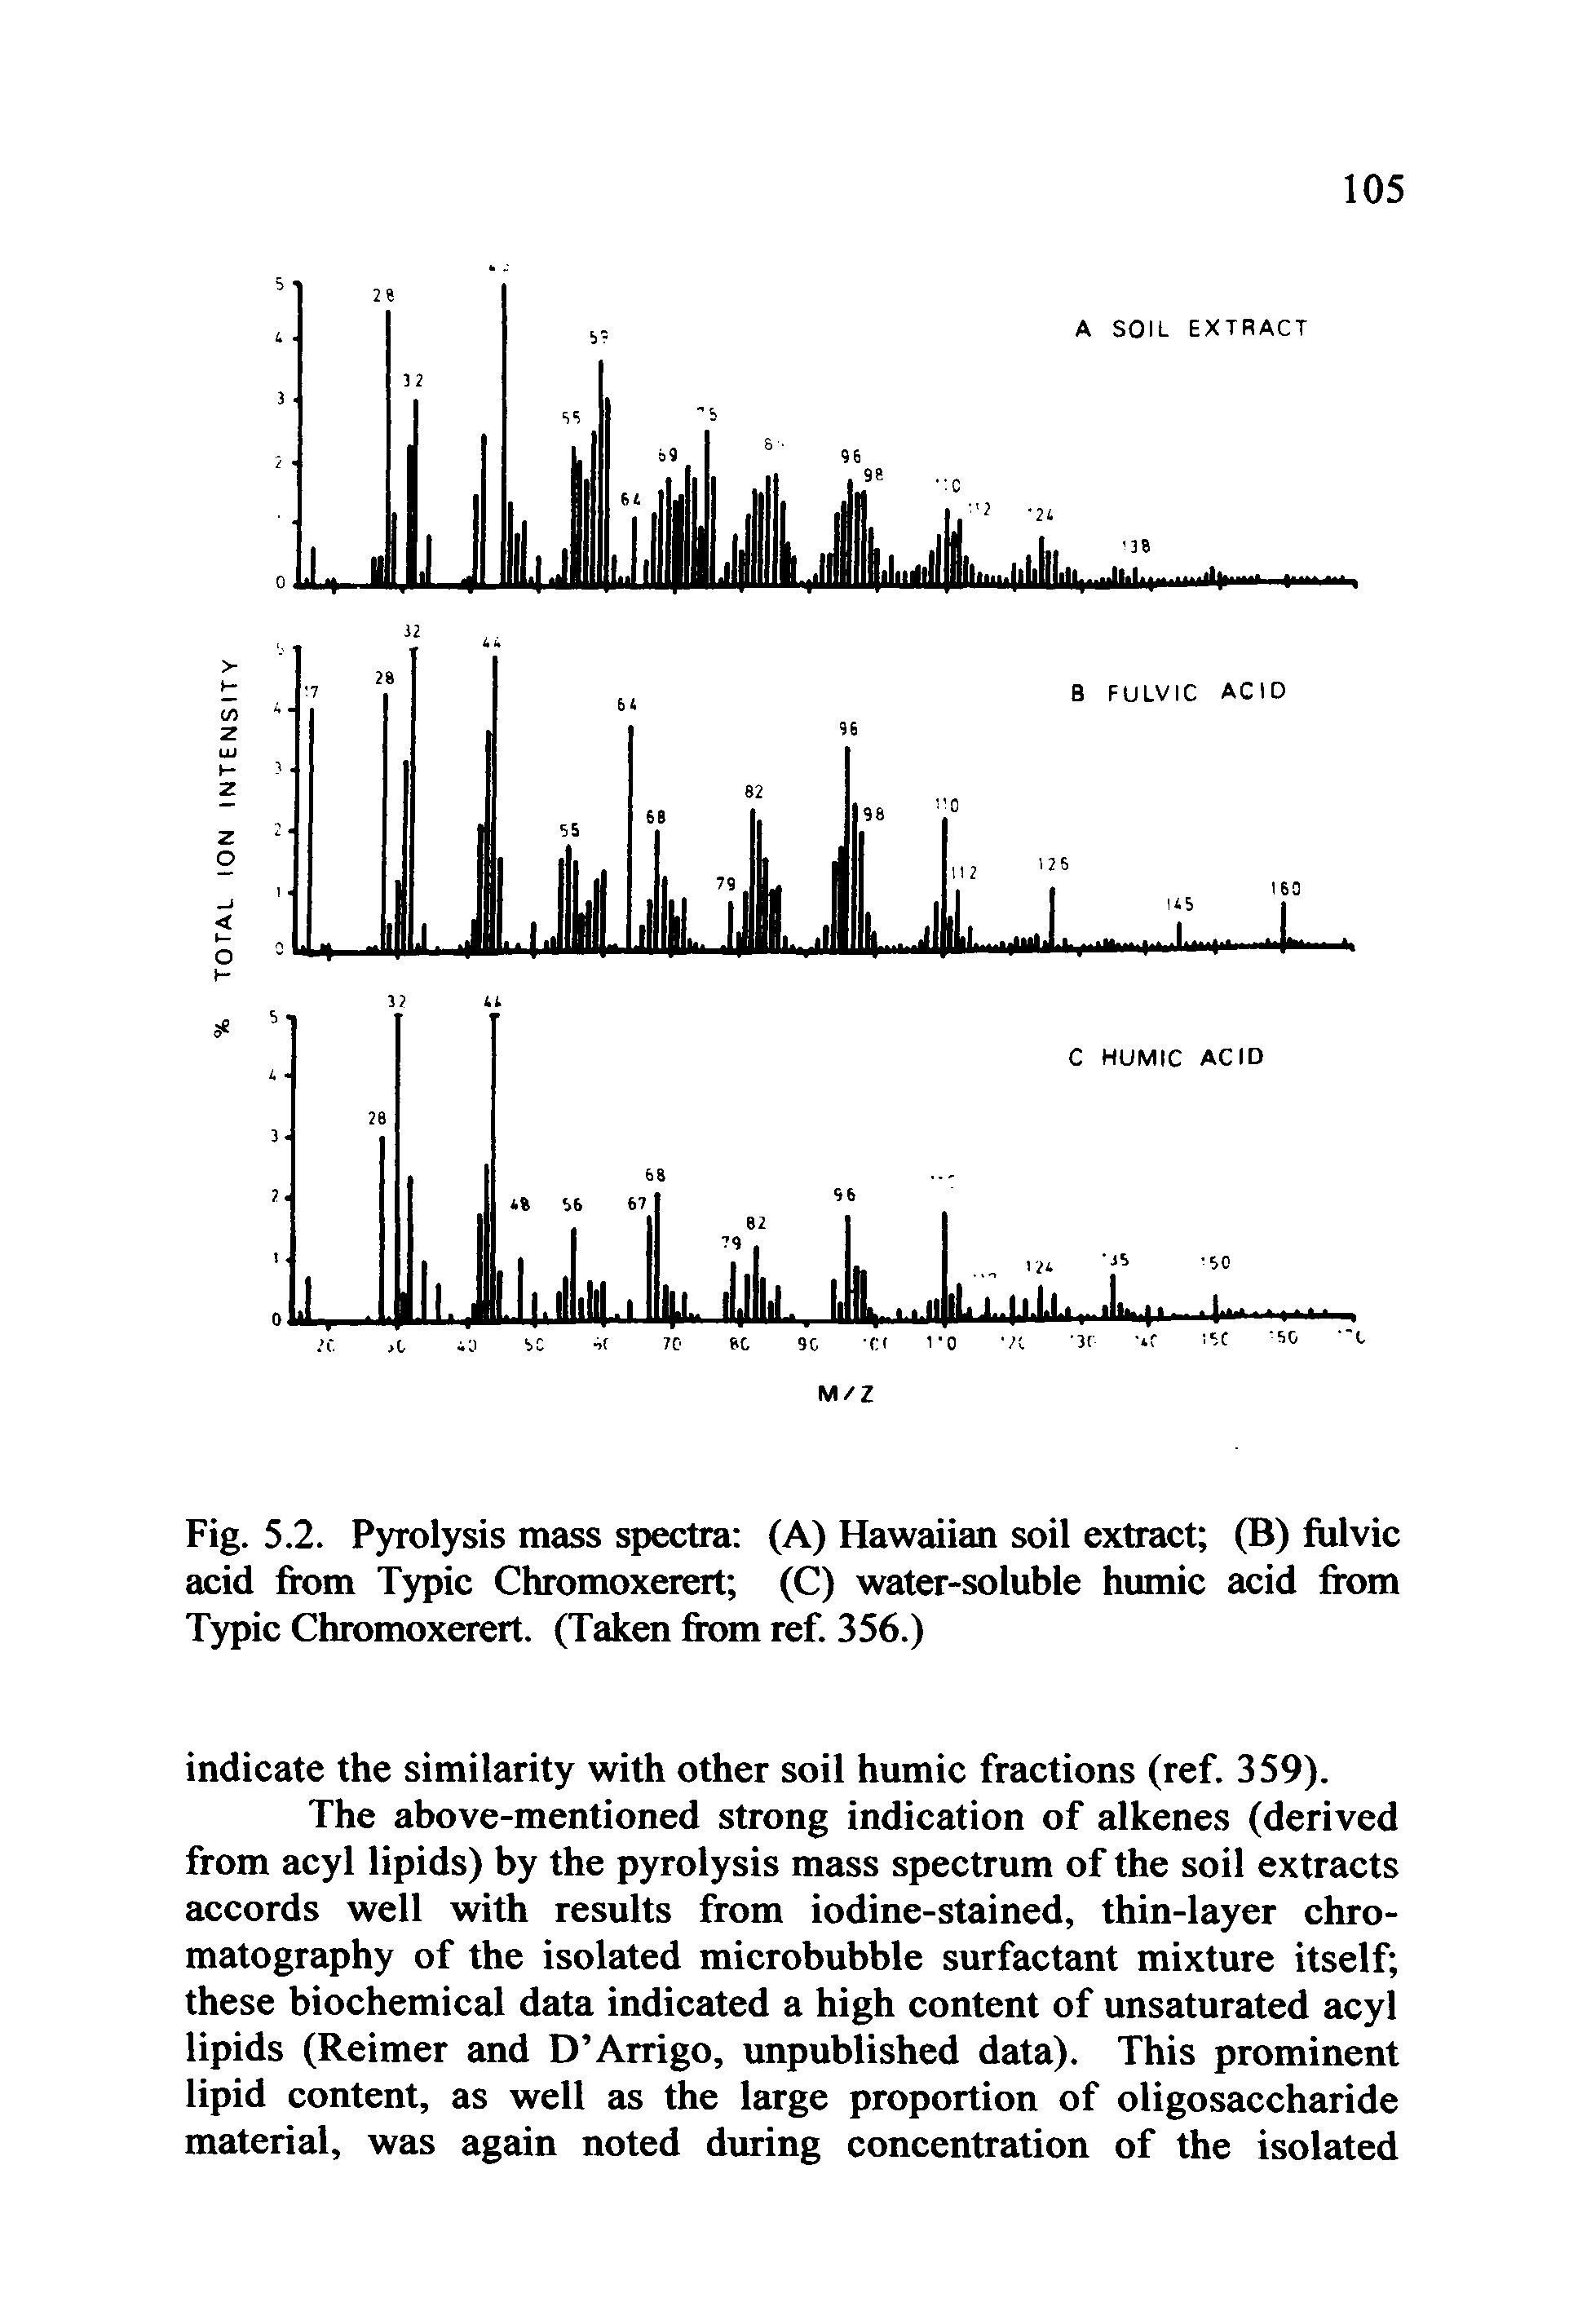 Fig. 5.2. Pyrolysis mass spectra (A) Hawaiian soil extract (B) fulvic acid from Typic Chromoxerert (C) water-soluble humic acid from Typic Chromoxerert. (Taken from ref. 356.)...